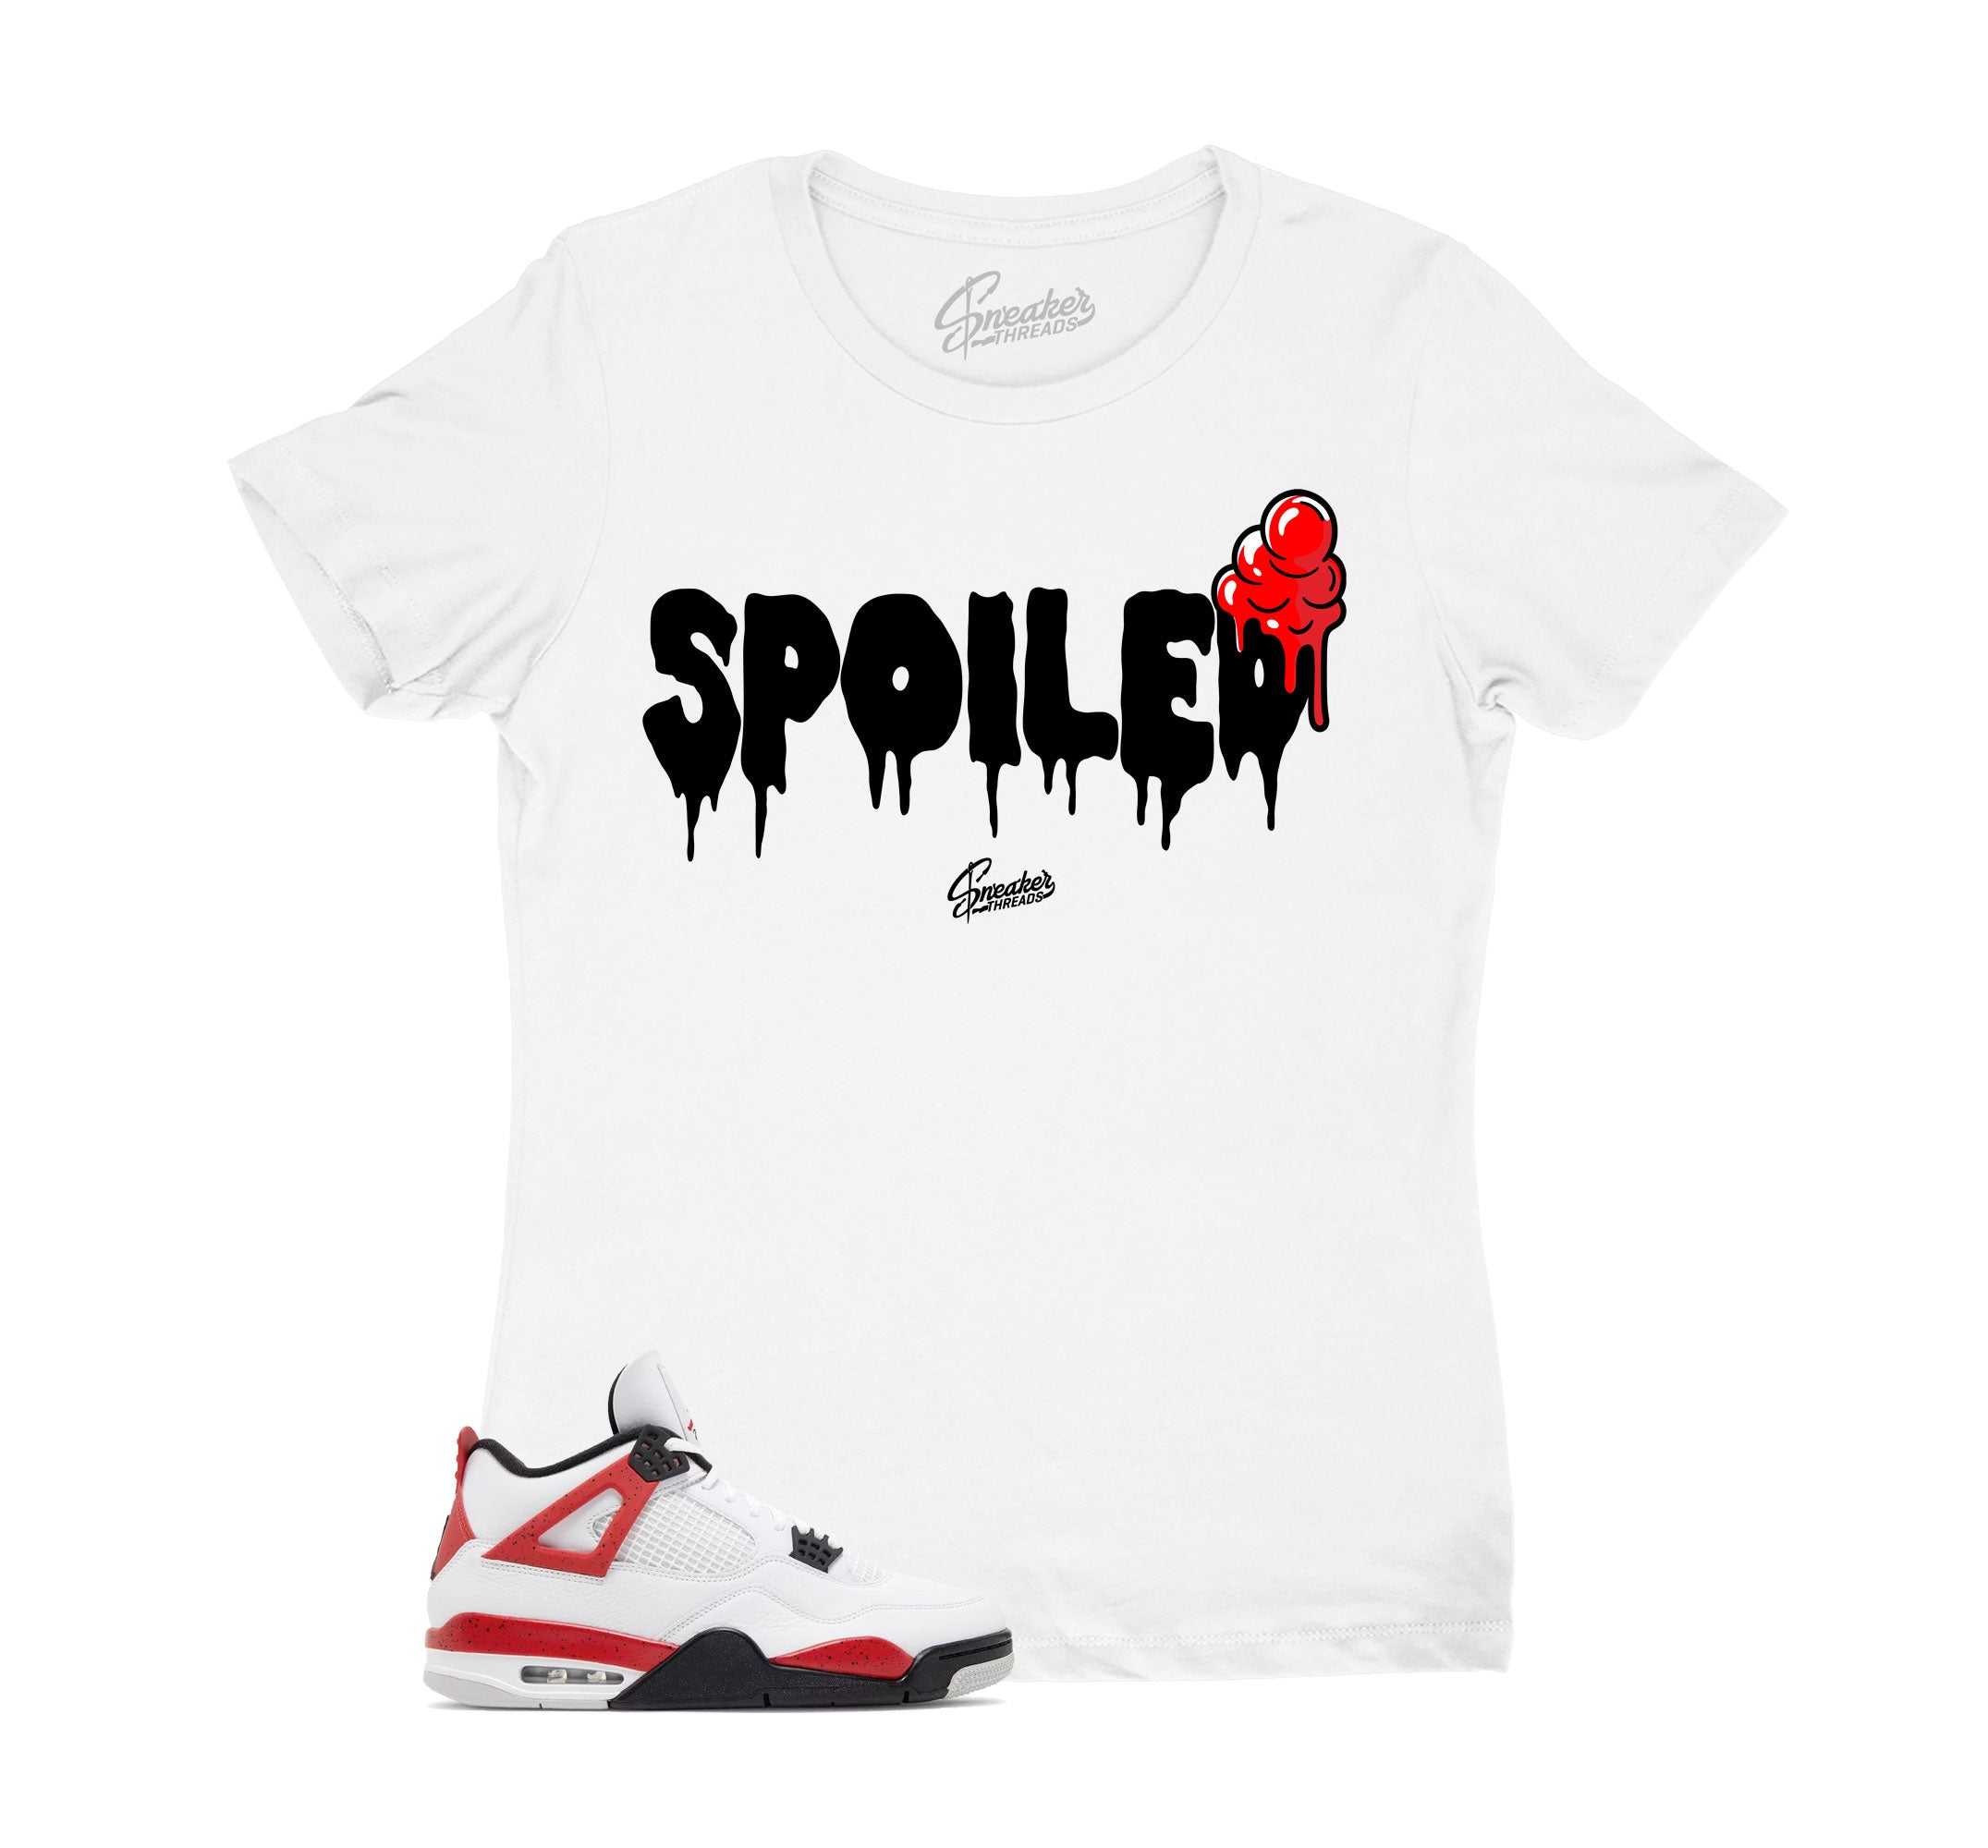 Womens Red Cement 4 Shirt - Spoiled - White